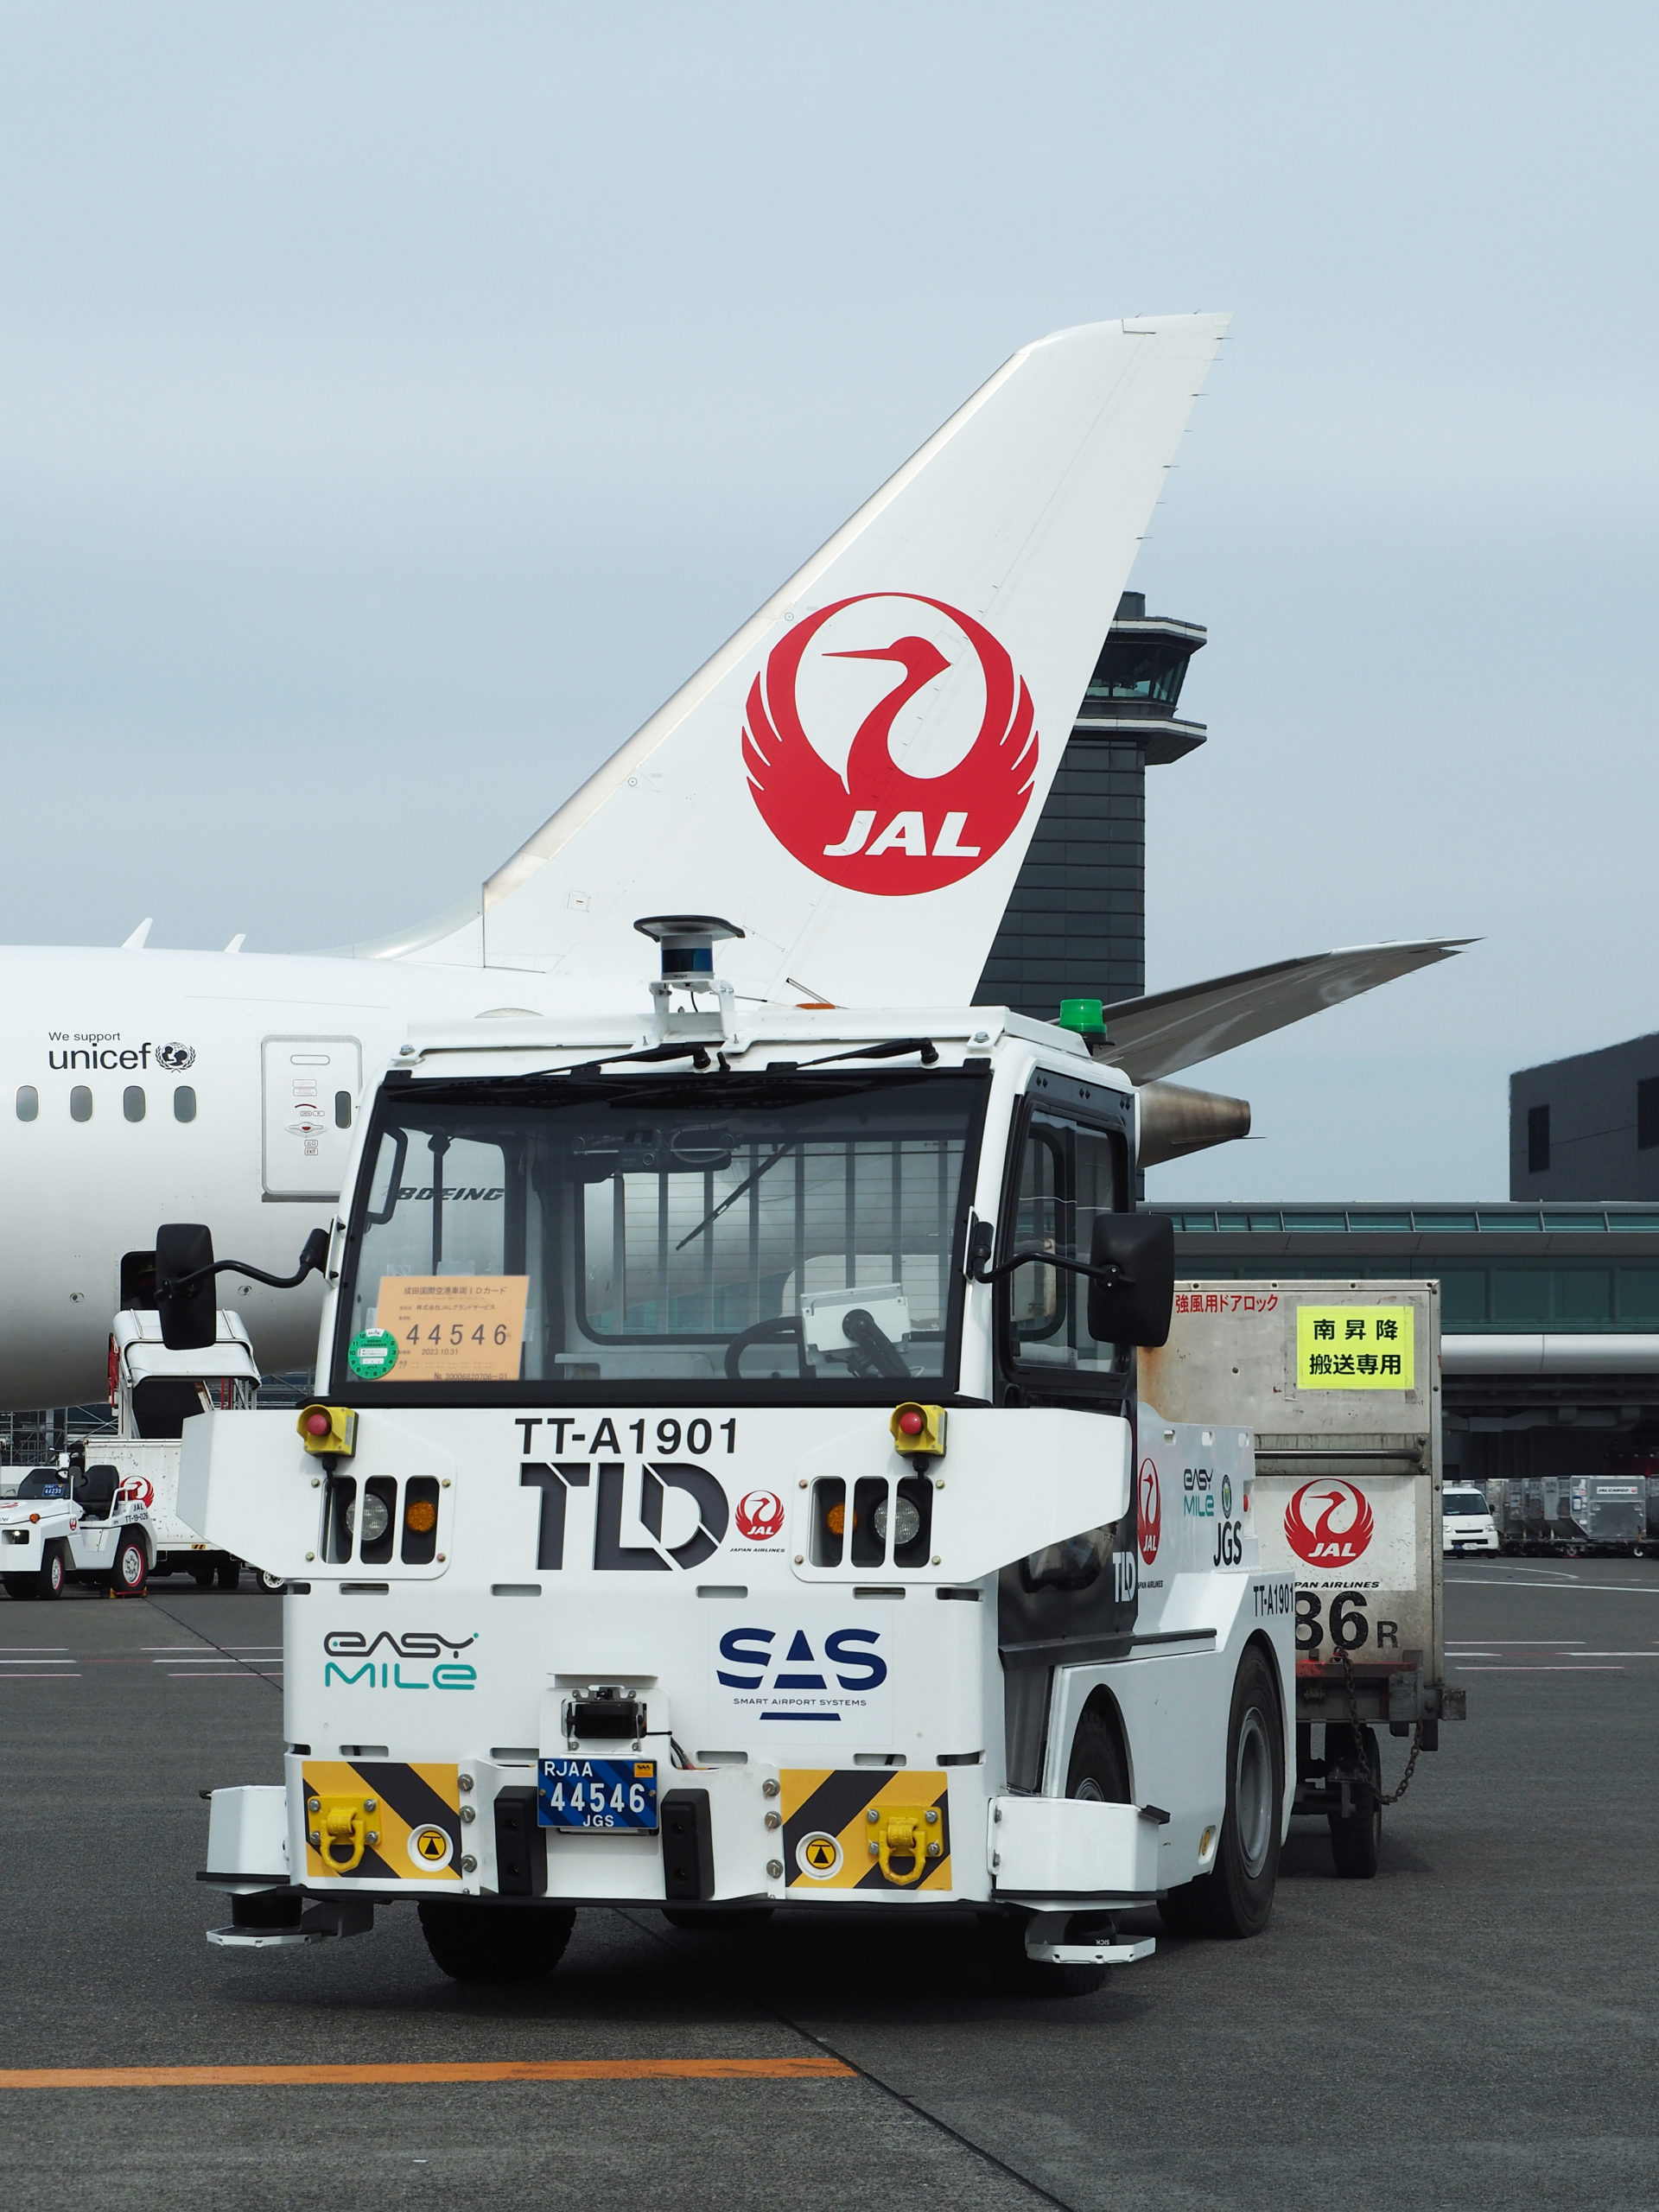 jal satellite travel company limited